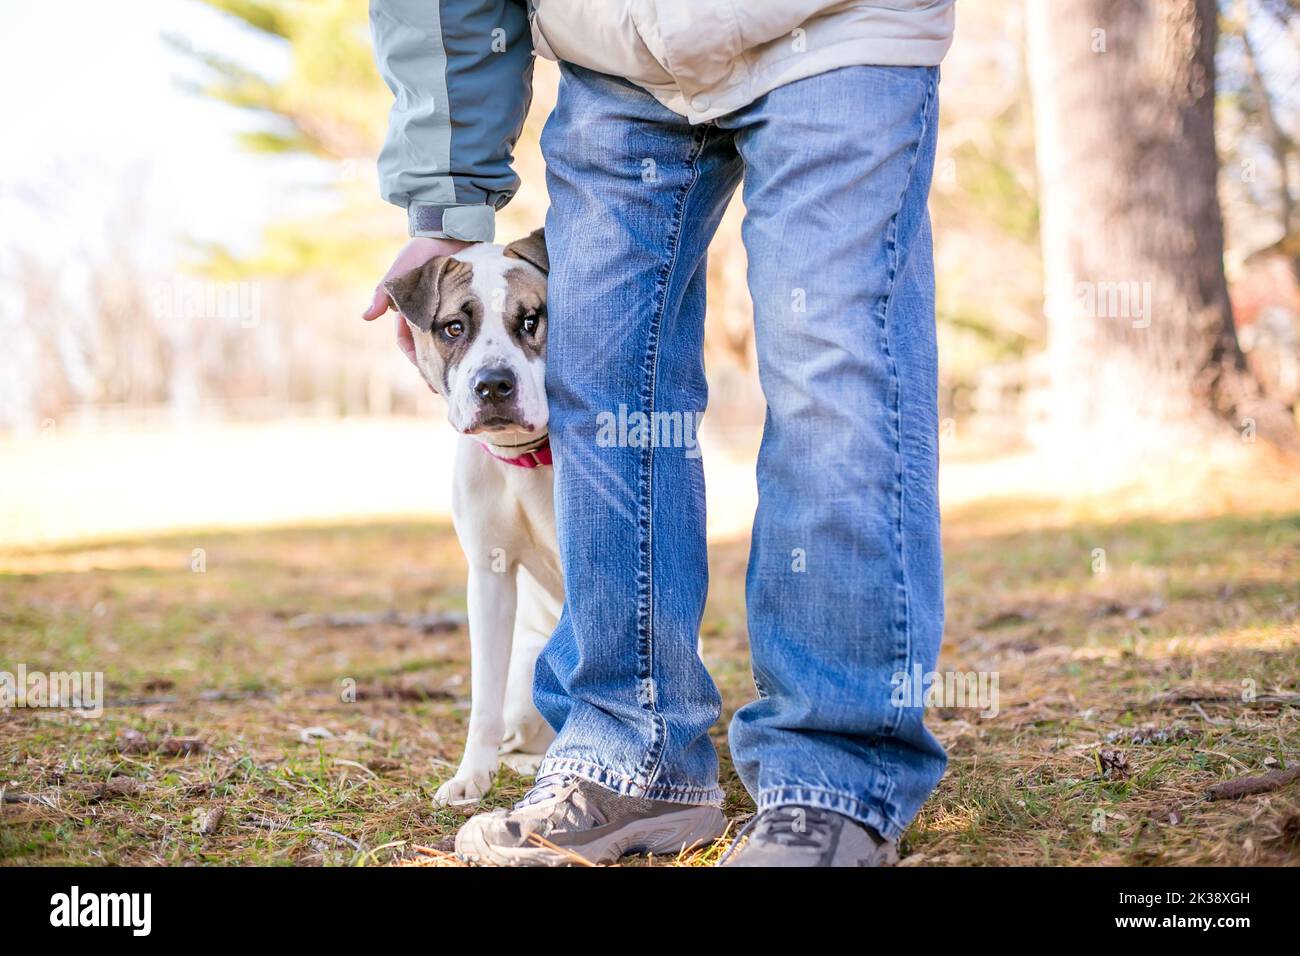 A shy mixed breed dog hiding behind a person with a nervous expression on its face Stock Photo